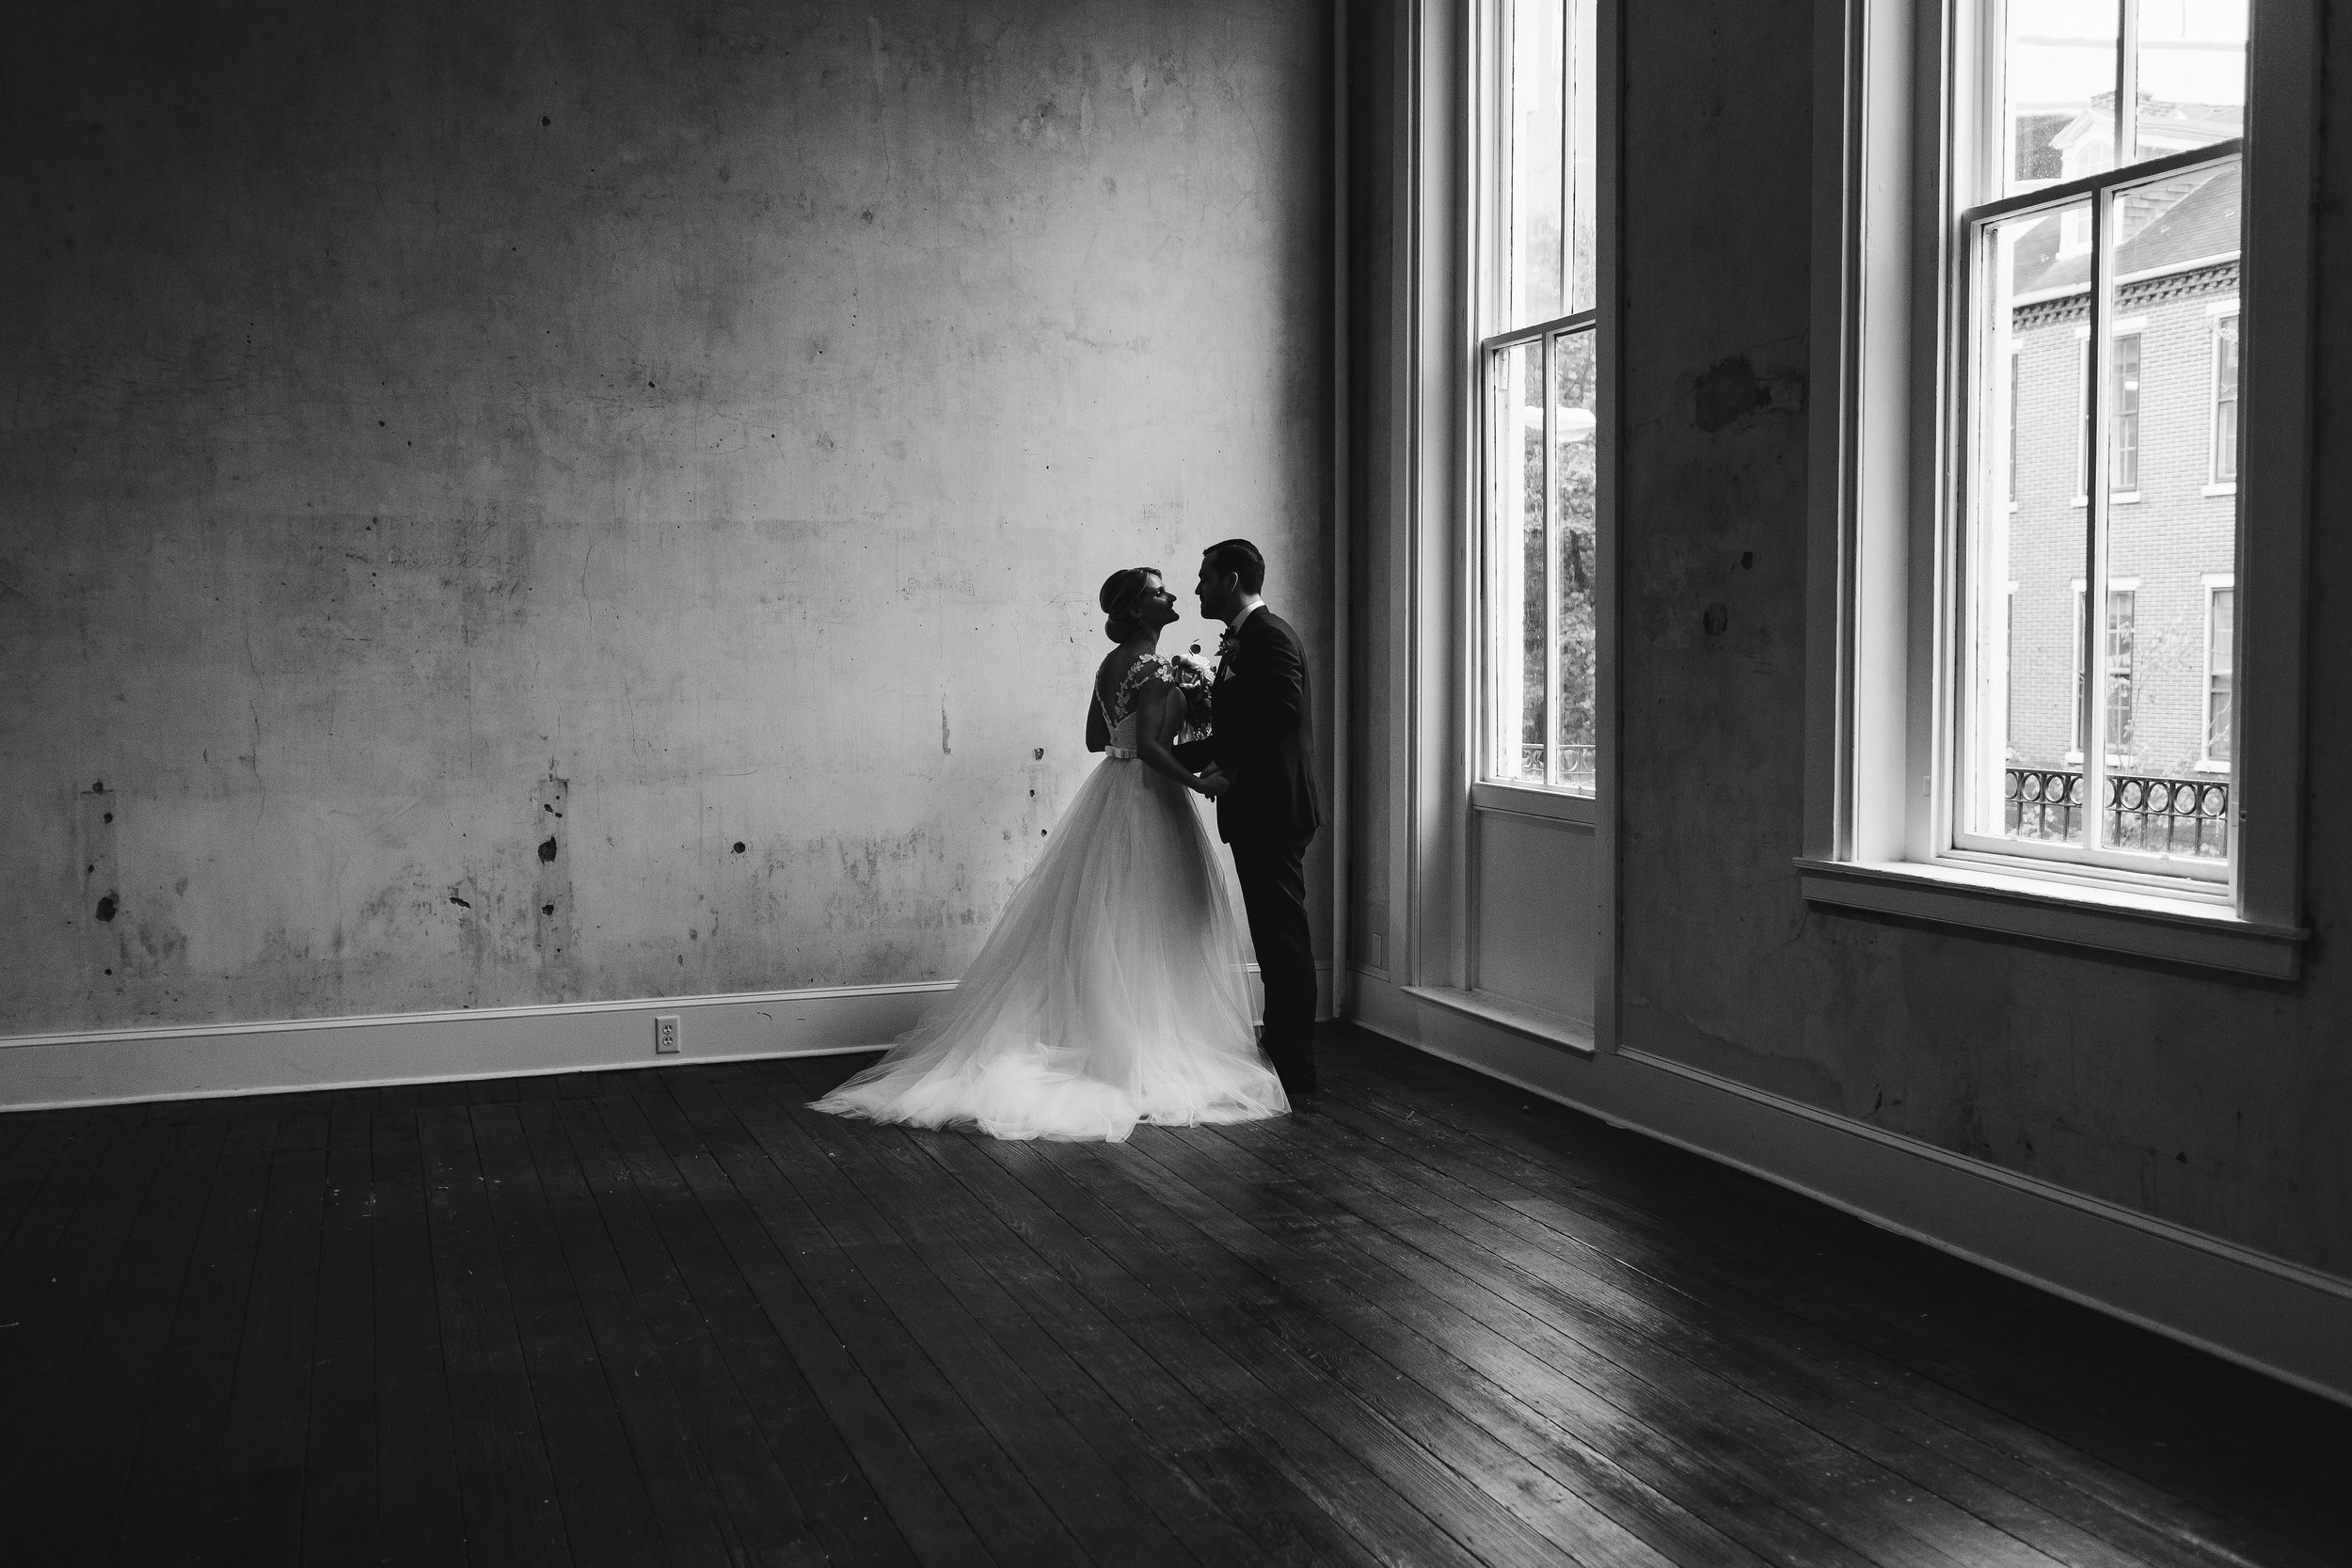 Bride and groom in dramatically lit large space